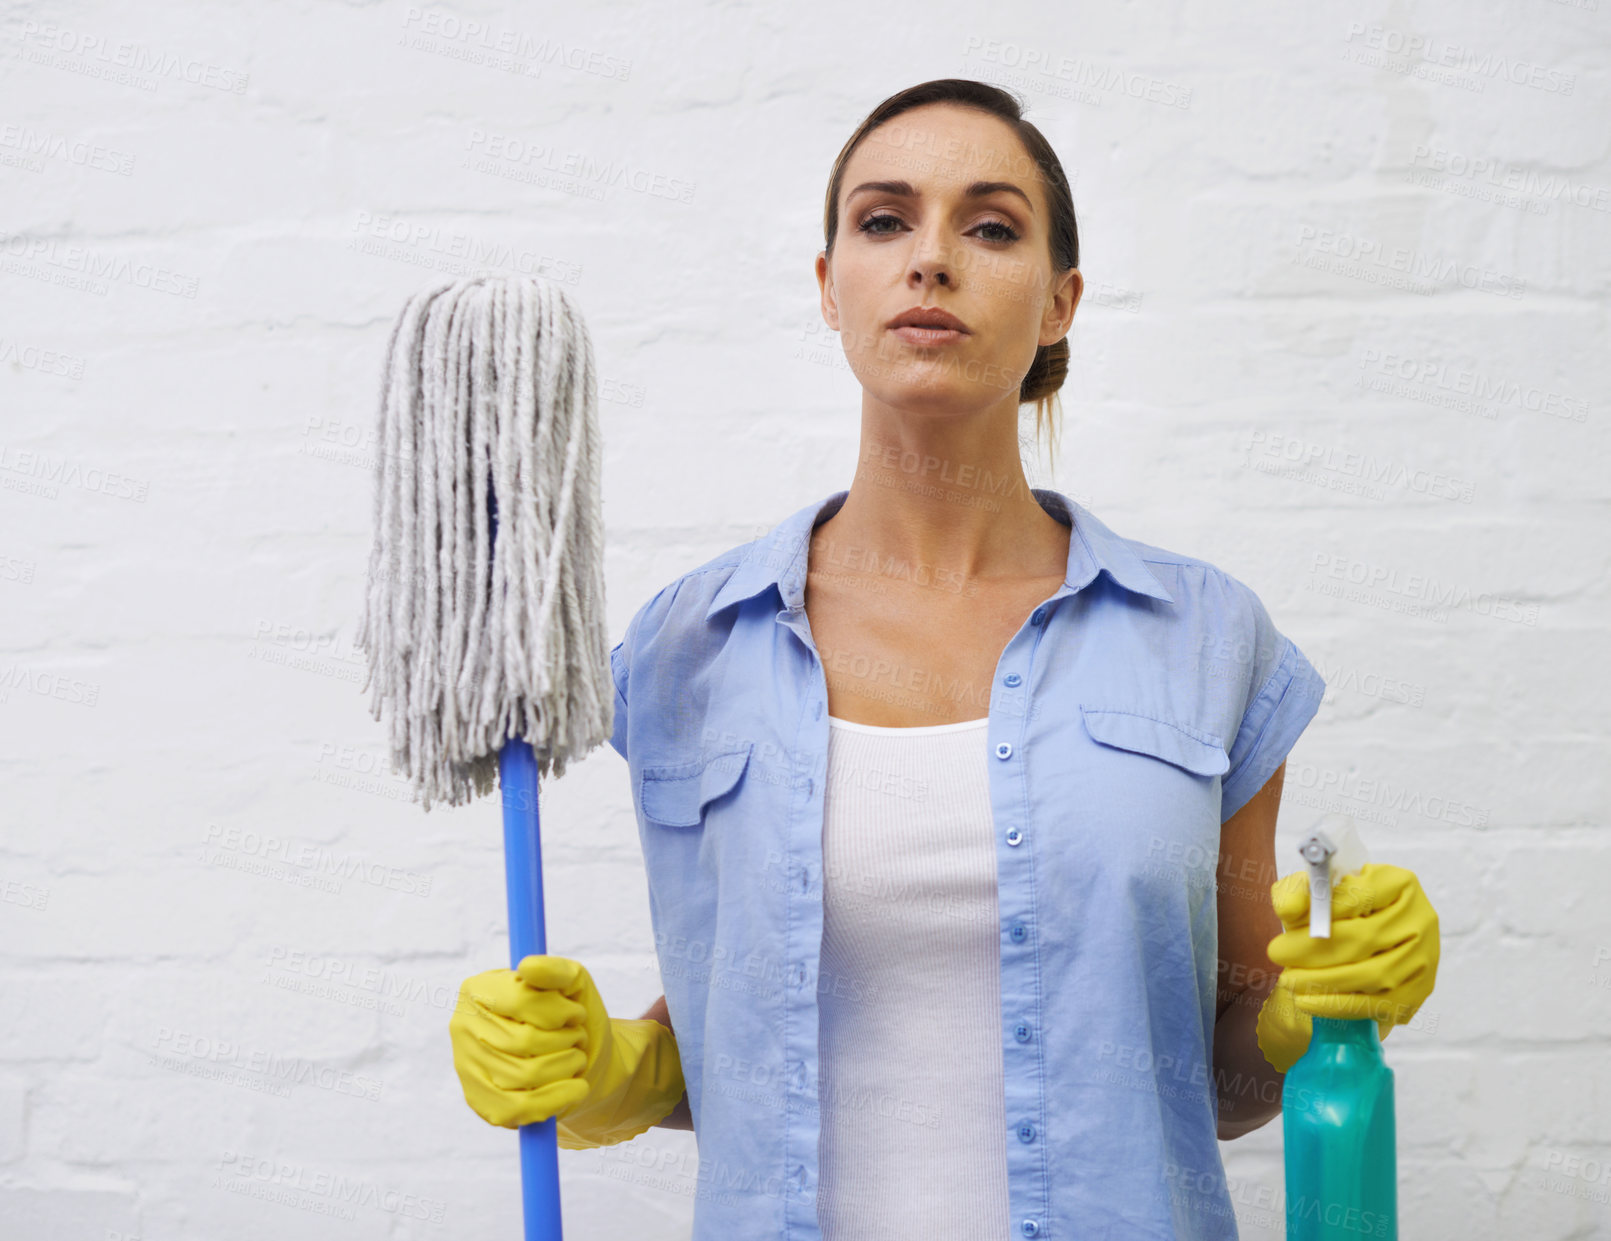 Buy stock photo Mop, spray and portrait of woman cleaning in bathroom, home or hotel with confidence. Housework, mission and proud girl, housekeeper or cleaner service washing dirt, germs and sanitation in apartment